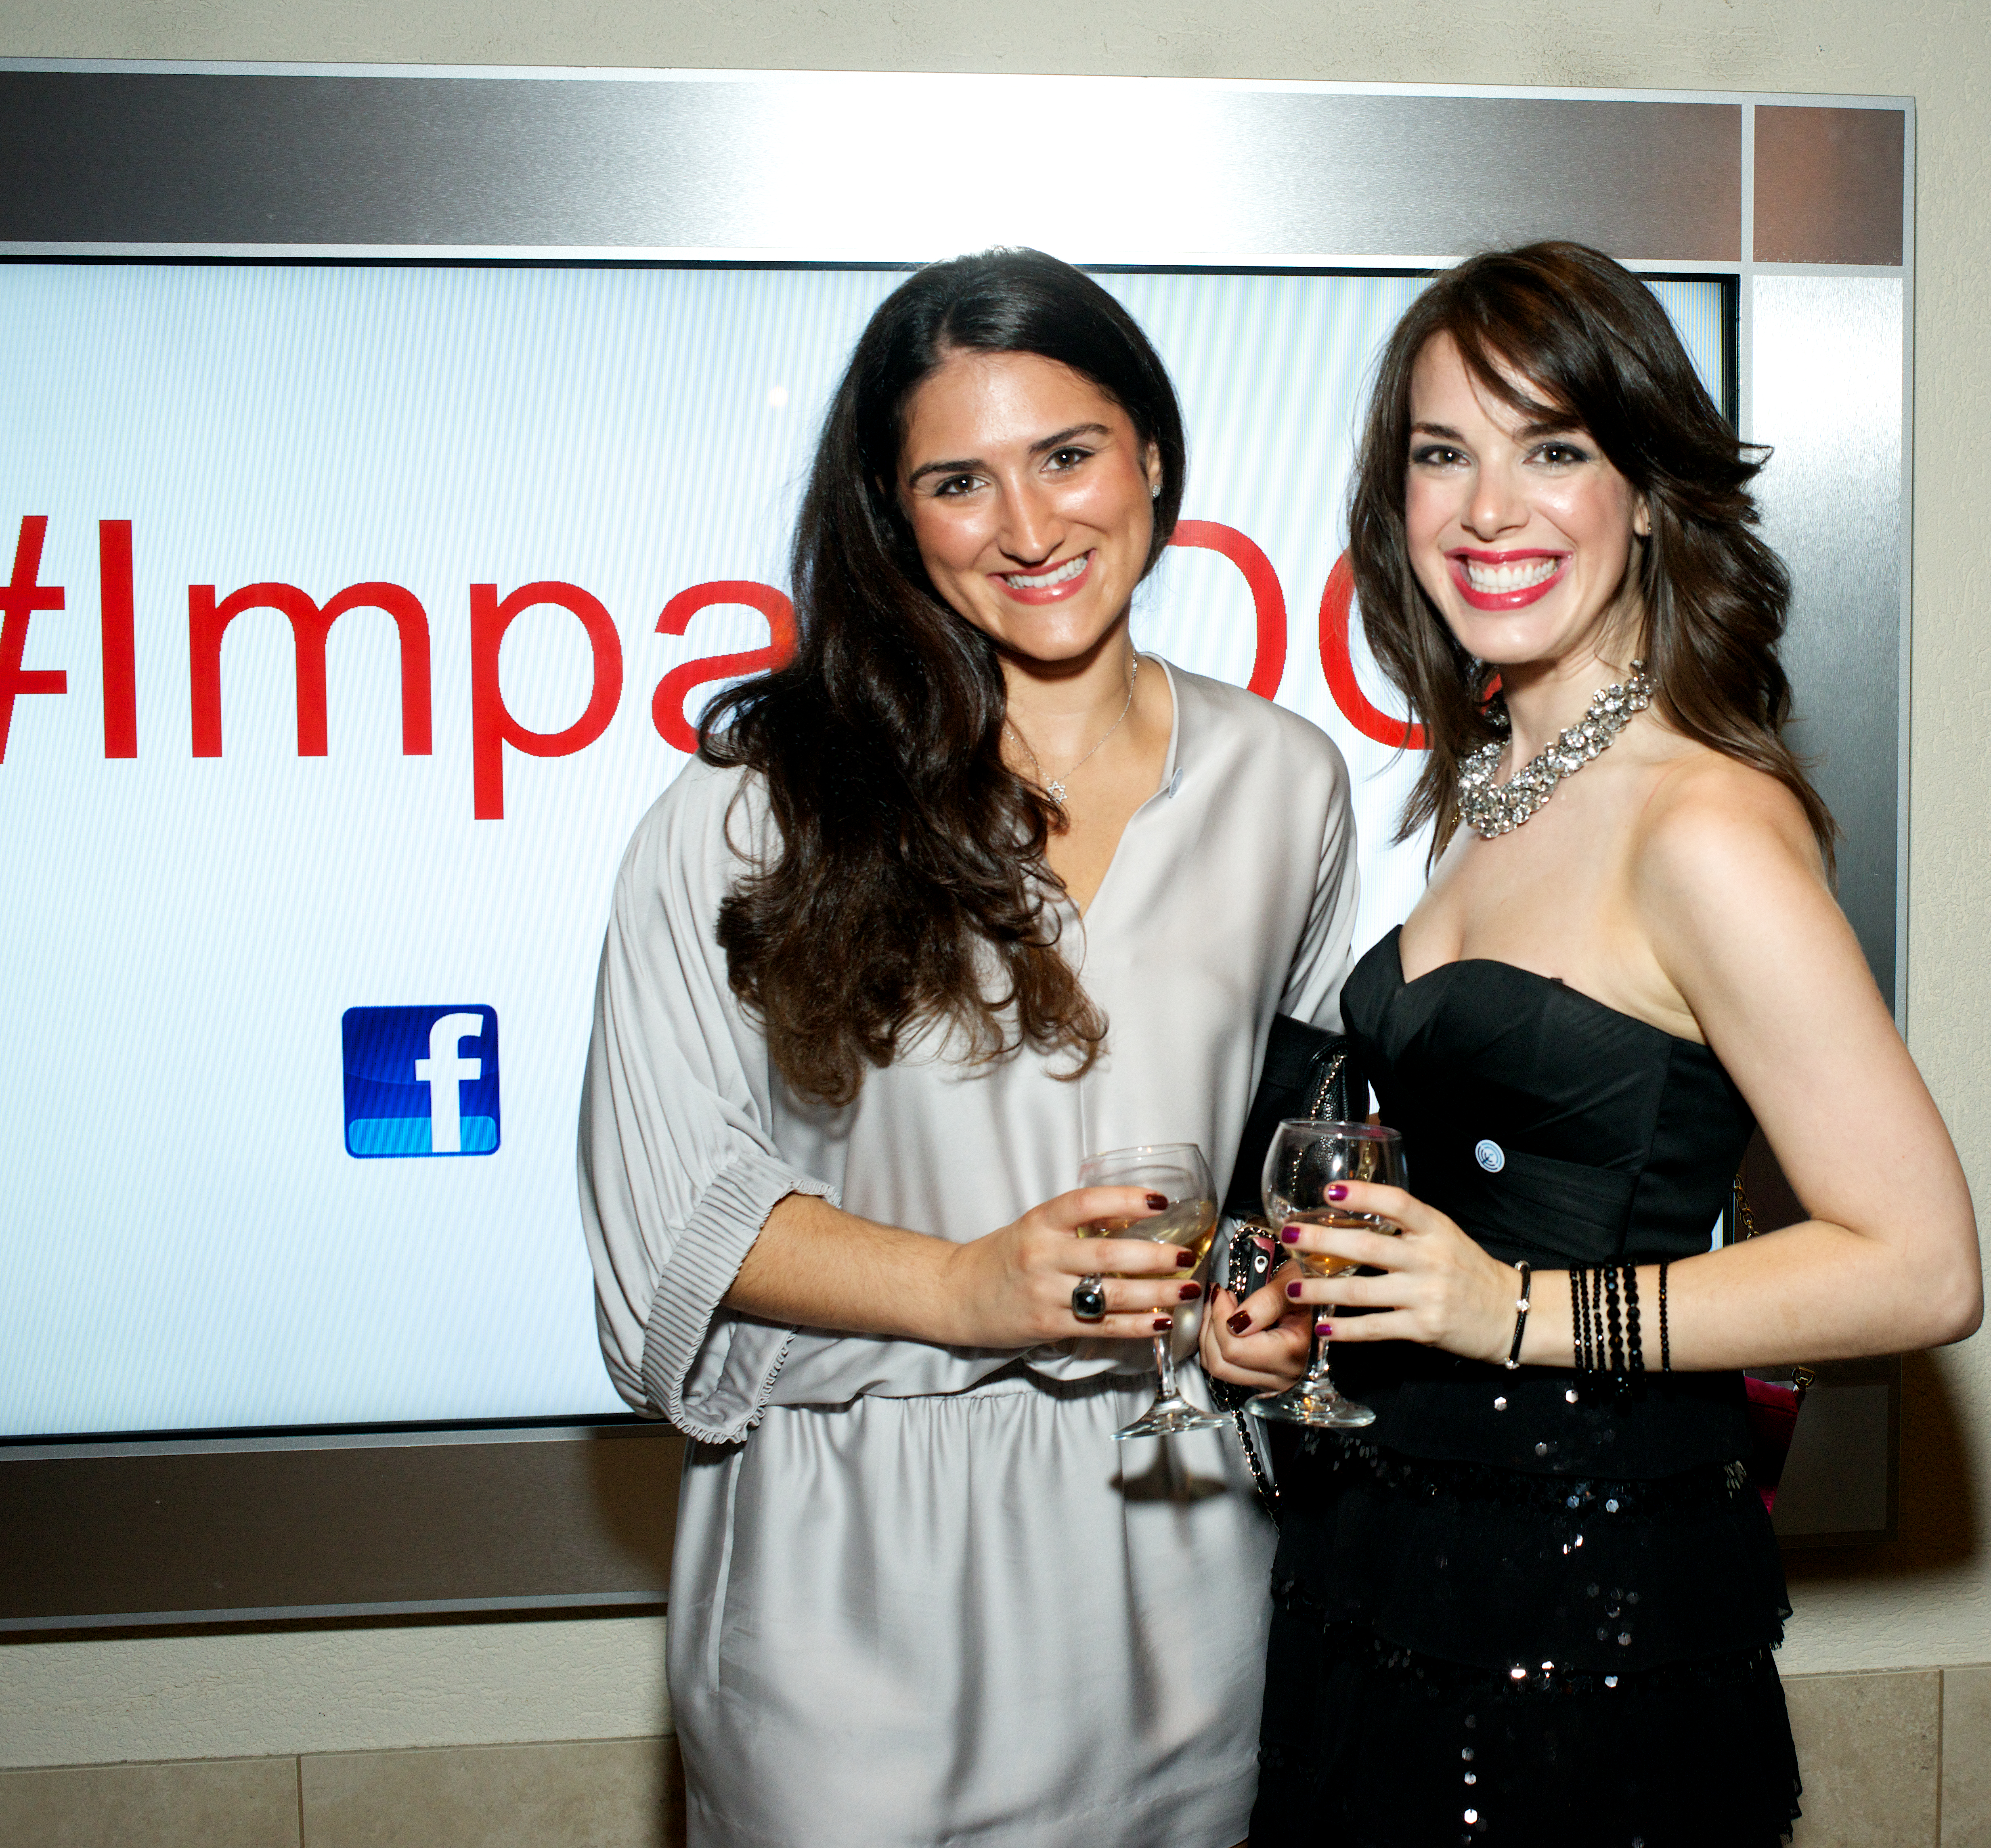 [Party Pix] Inside Impact DC’s Inspired Evening at the Howard Theatre